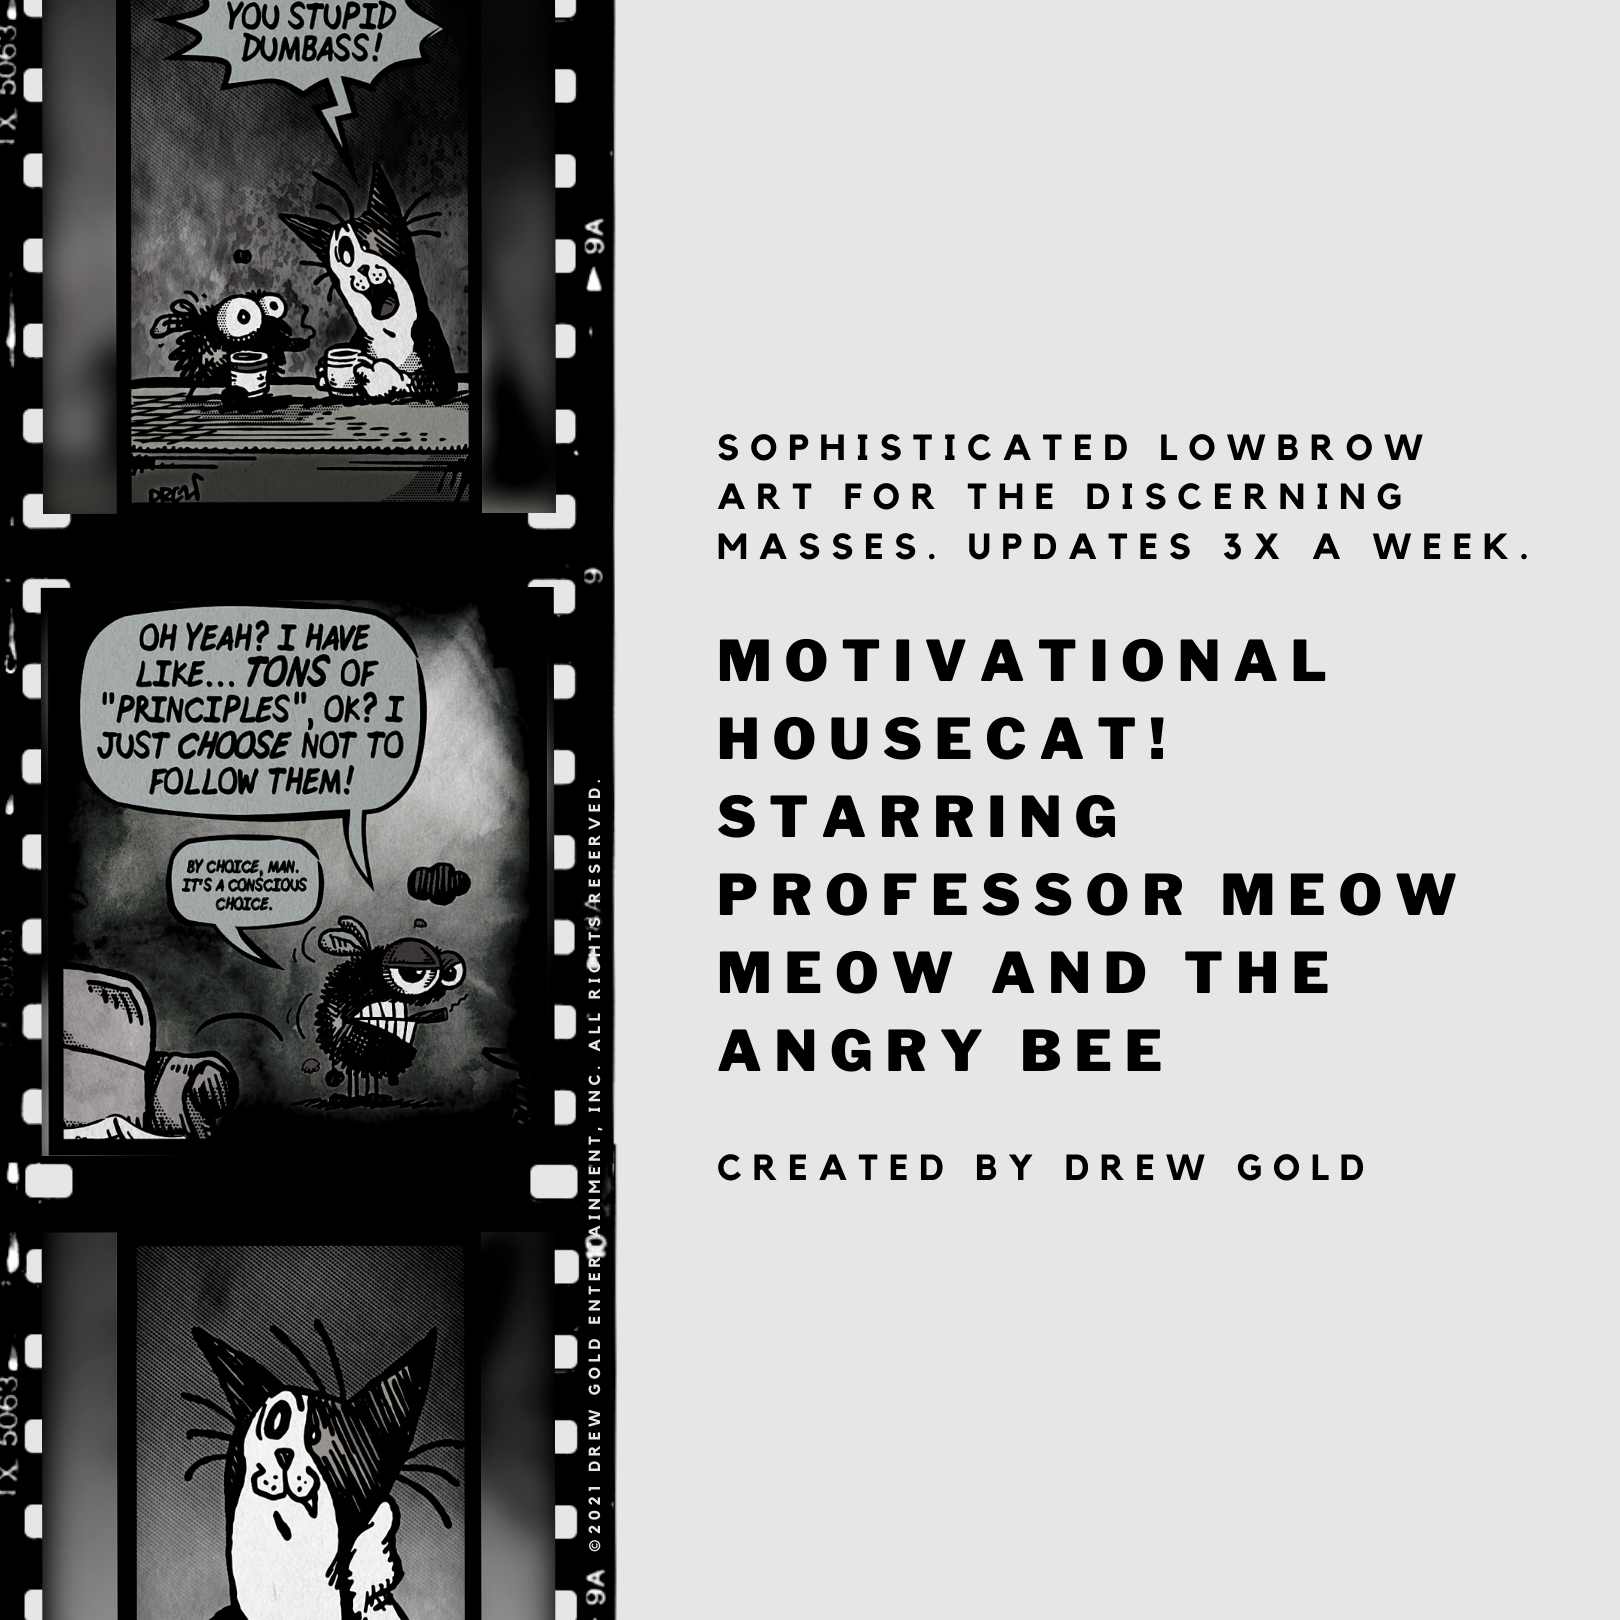 Drew Gold loves making comics and illustrations starring a calico housecat named Professor Meow Meow and an angry bumblebee named The Angry Bee. If you're looking for a great little small press comic, look no further.